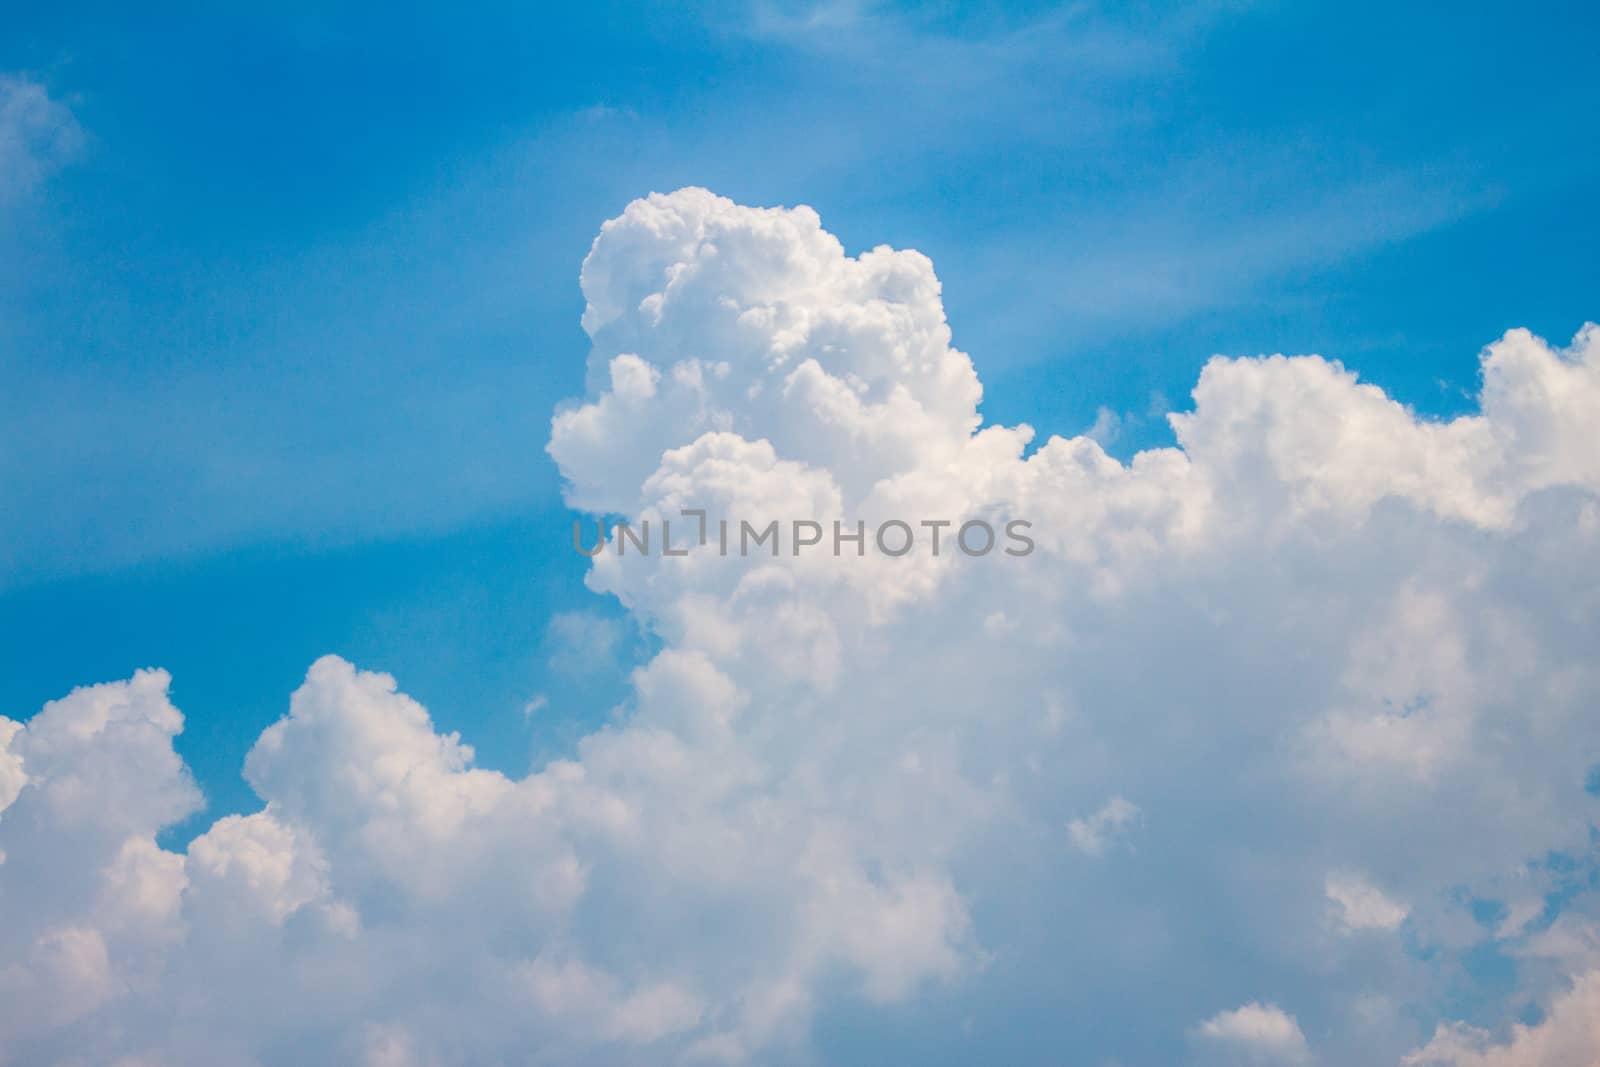 The Blue sky with white cloud be overcast by peerapixs